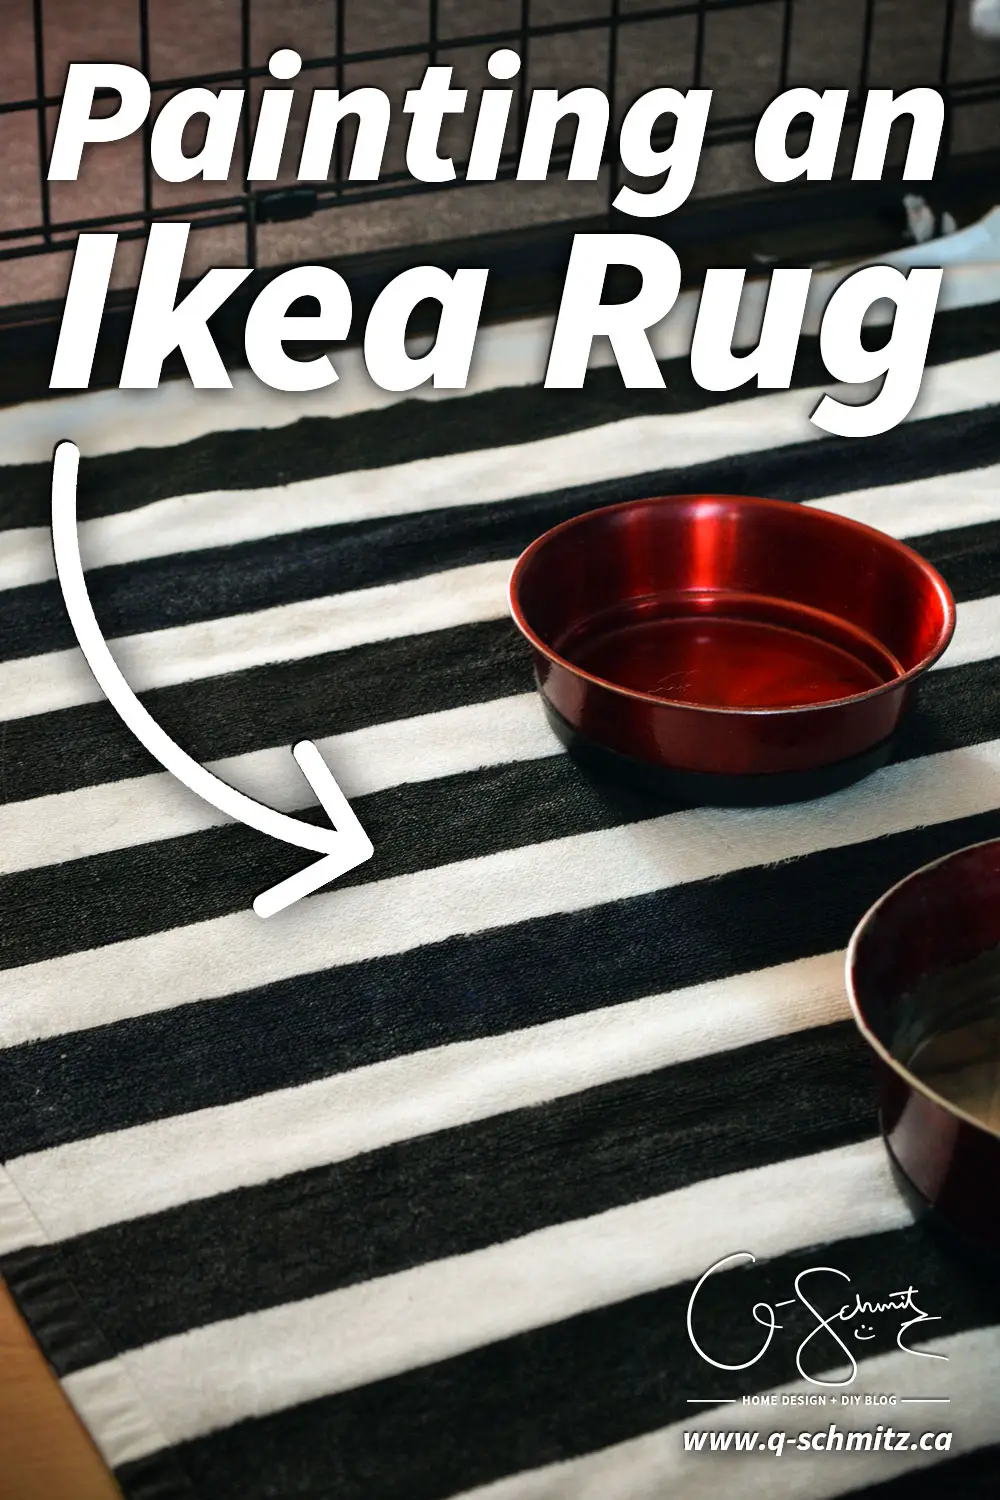 I have a simple project to share with you to update any fabric. I chose painting an Ikea rug, which is pretty quick and easy (seriously, anyone can do it!).